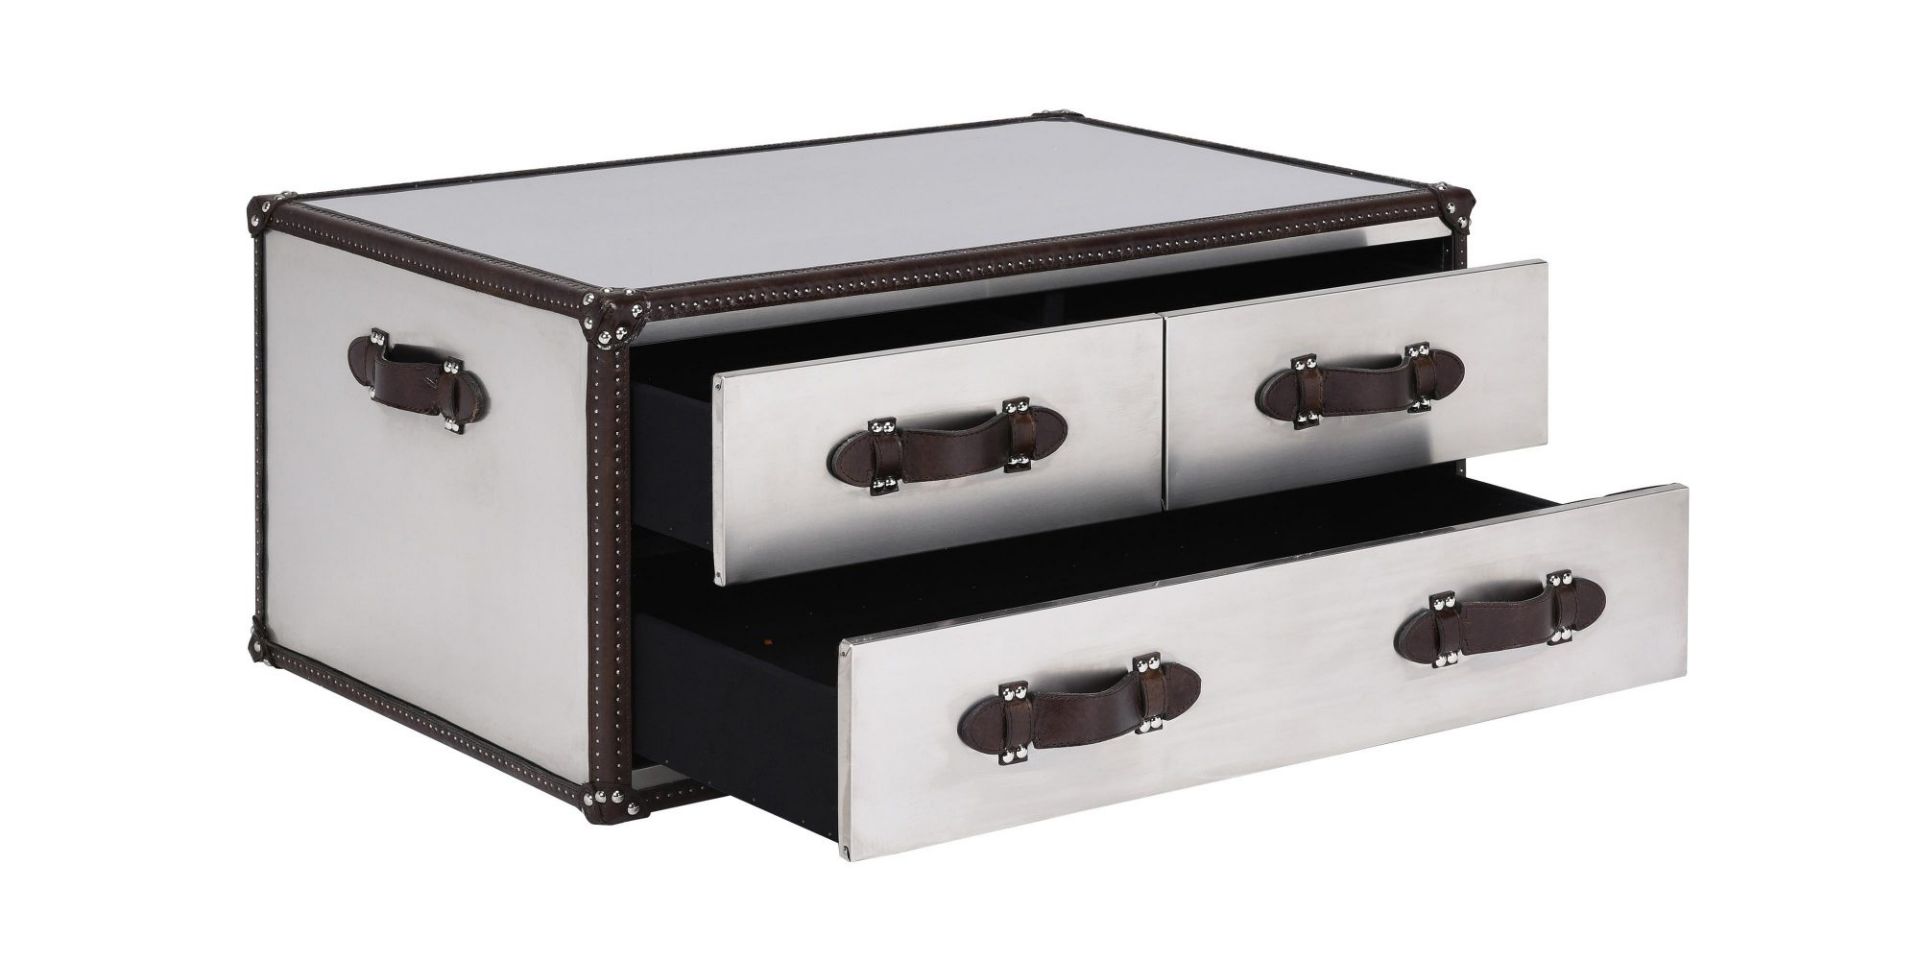 Sherborne Coffee Table A Contemporary Take On Classic Steamer Trunk Finished In Stunning Brushed - Image 2 of 3